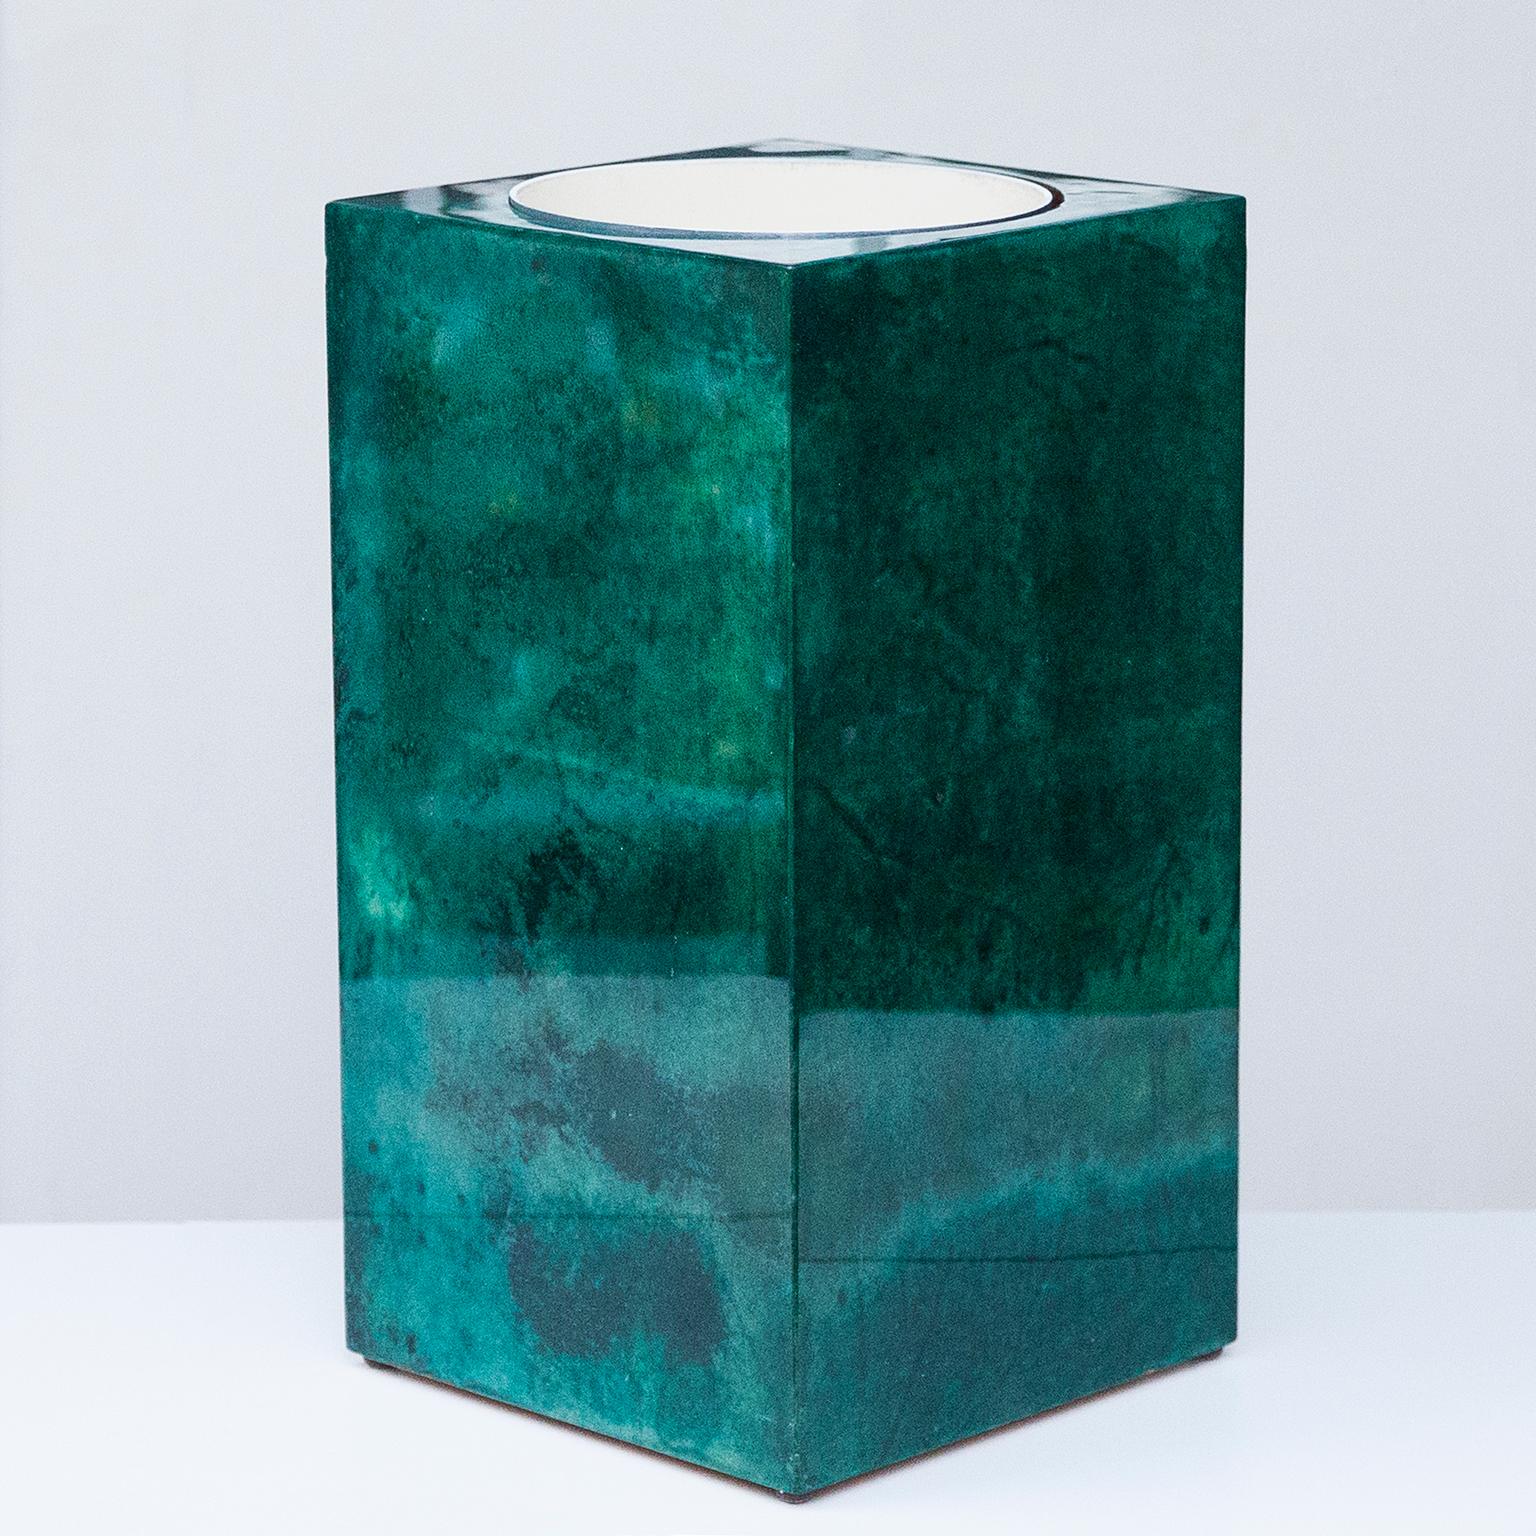 Wonderful umbrella stand or huge vase by Aldo Tura in green parchment and metal inlay, in perfect condition.
Along with artists like Piero Fornasetti and Carlo Bugatti, Aldo Tura (1909-1963) definitely belonged to the mavericks of Italian design.